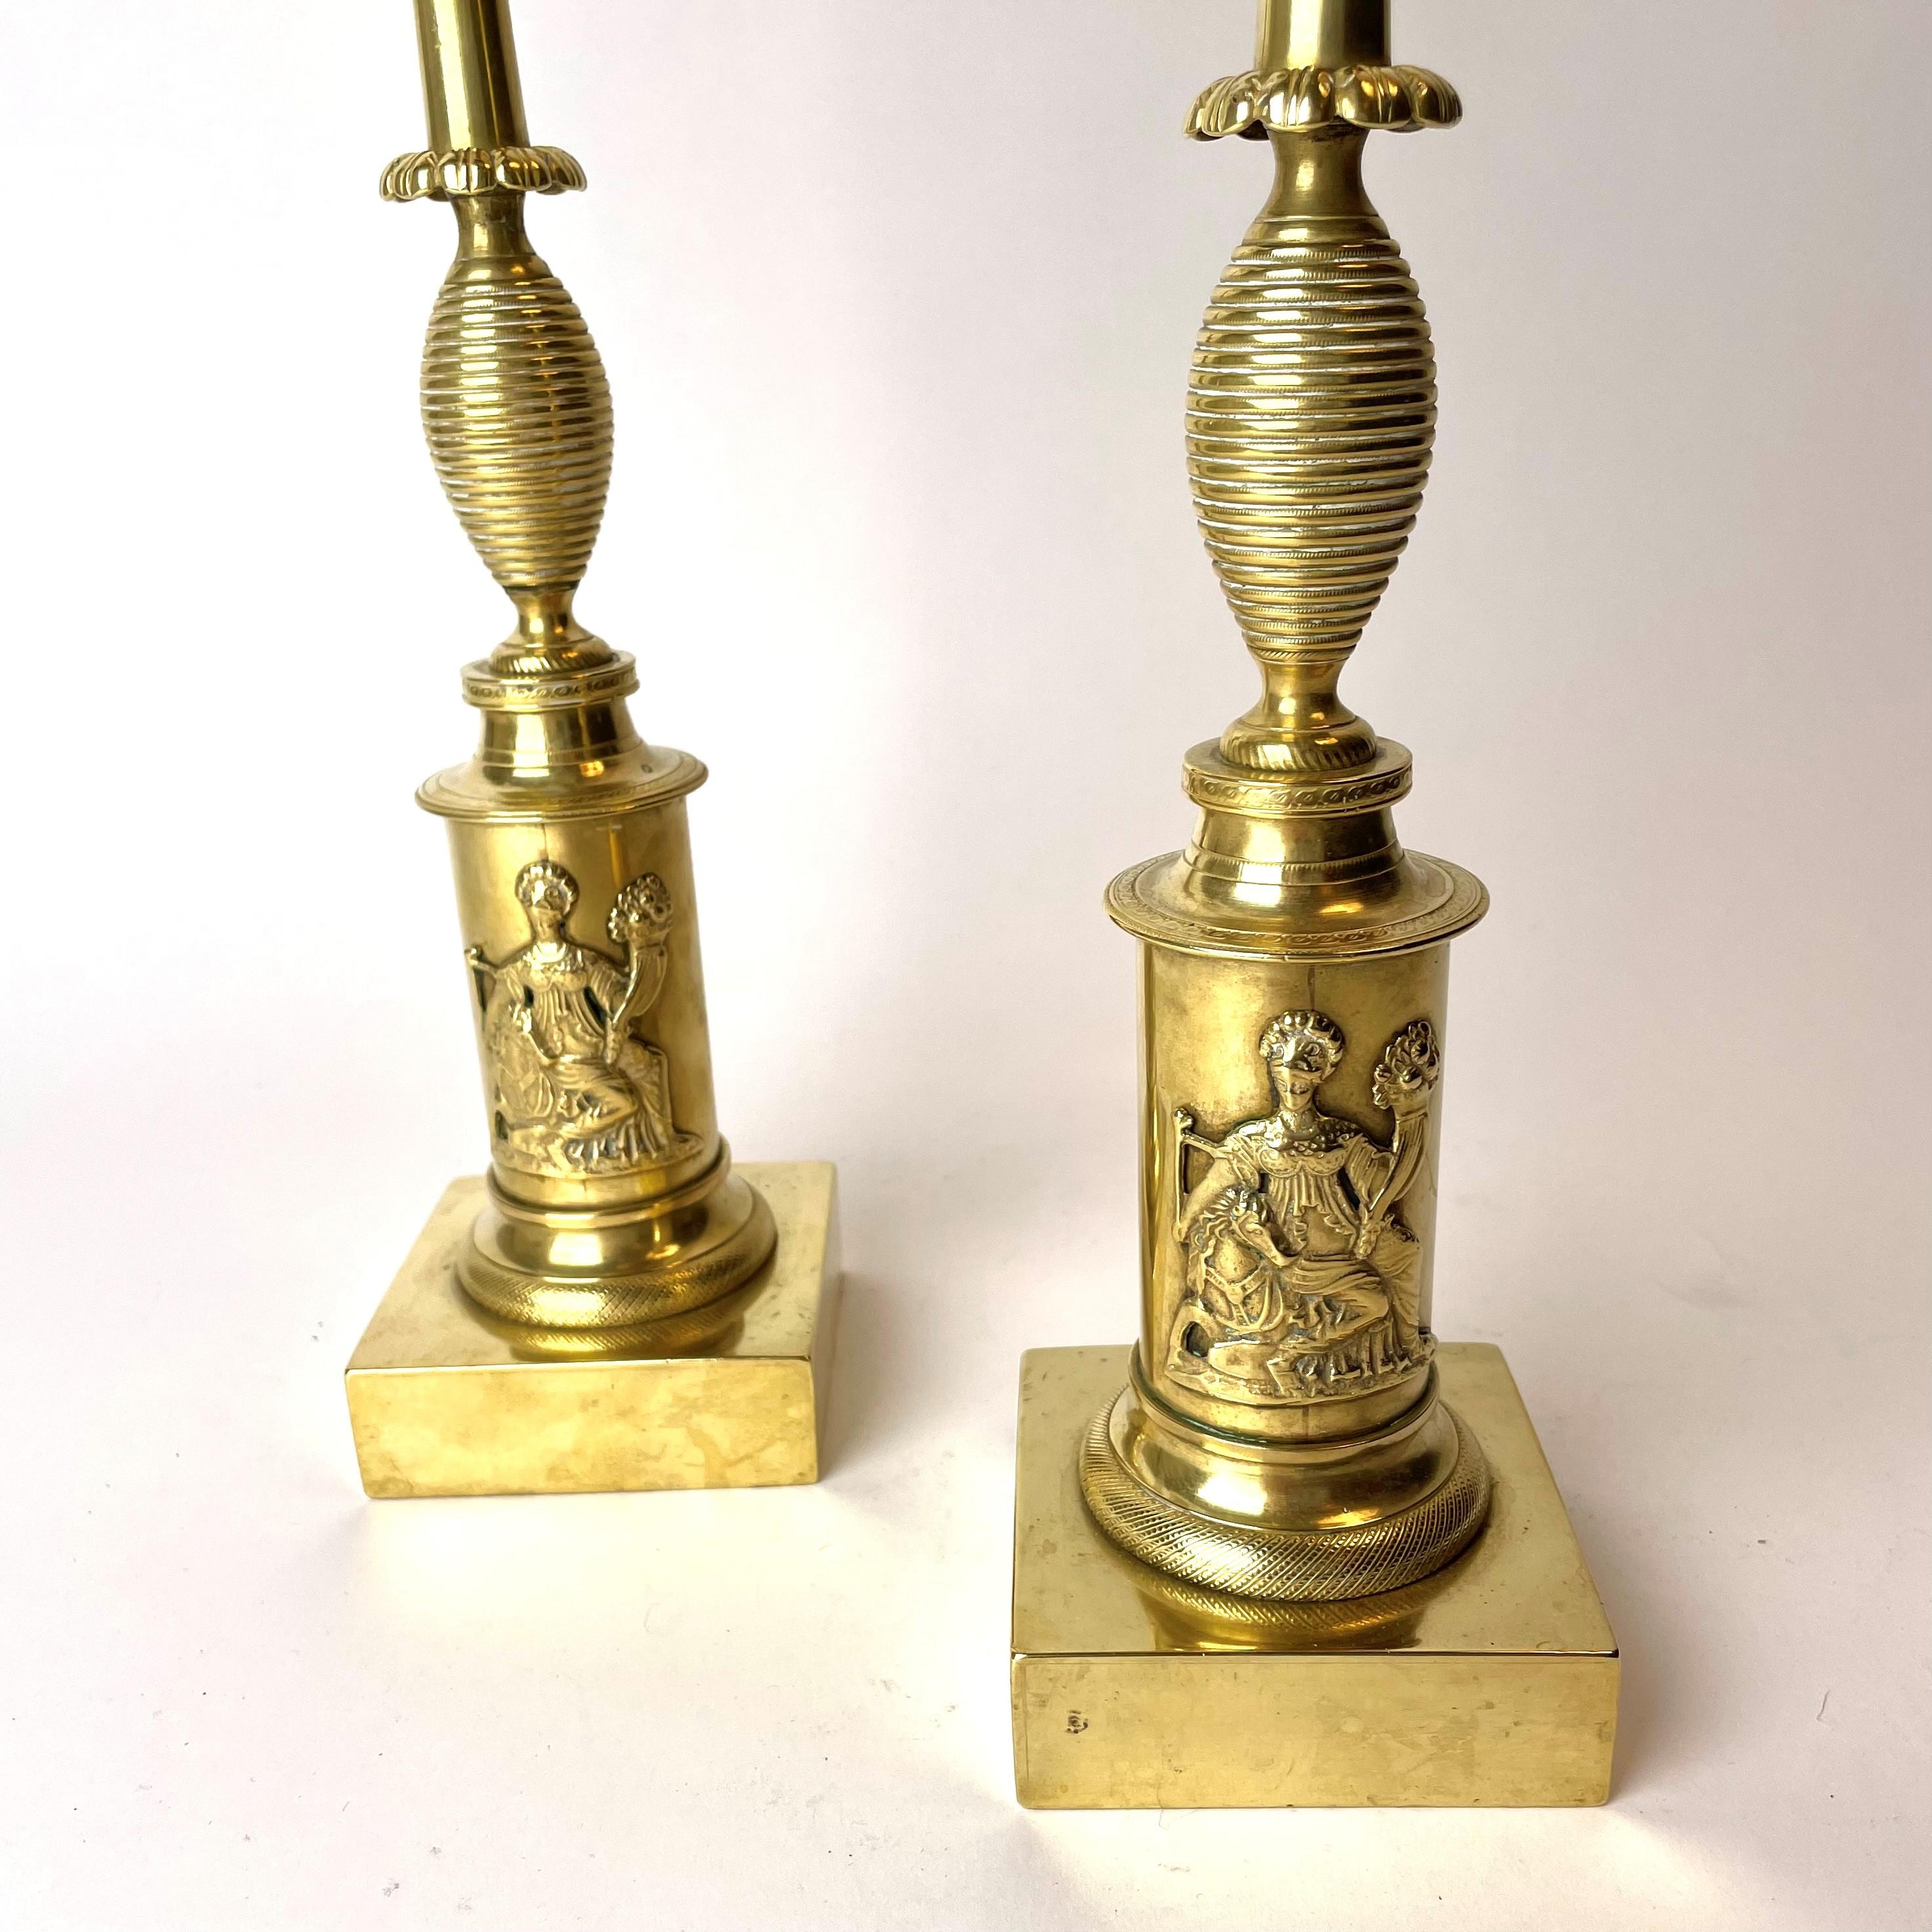 Early 19th Century Elegant Pair of Candelabras in Swedish Empire 'Karl Johan' from the 1820s